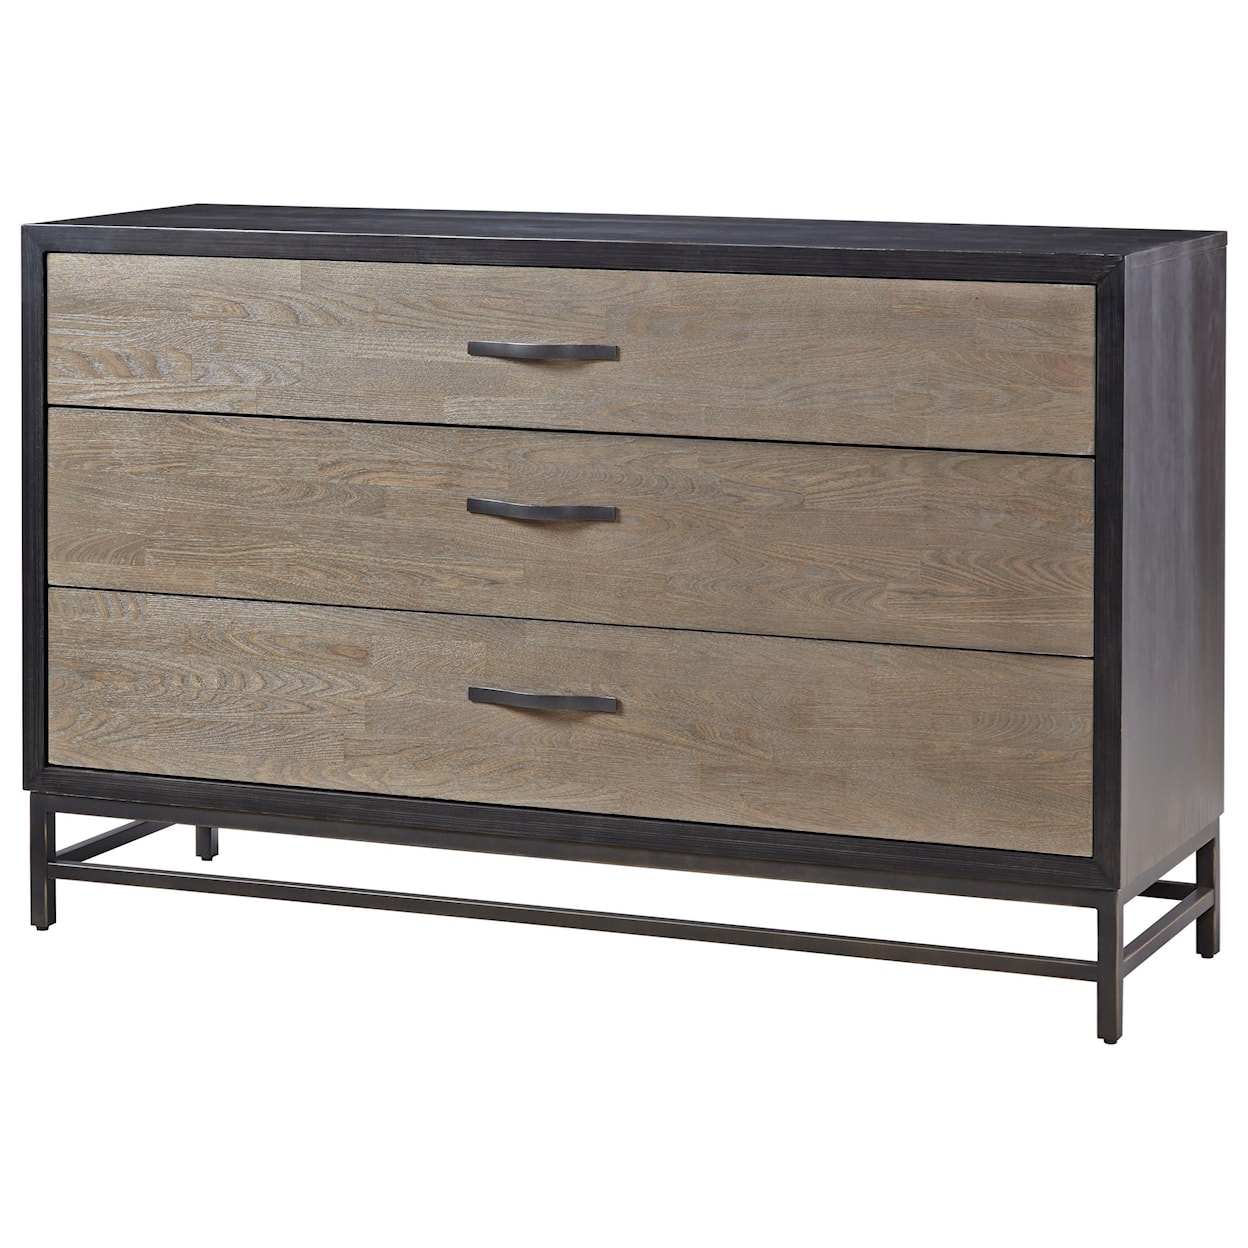 Universal Curated Dresser